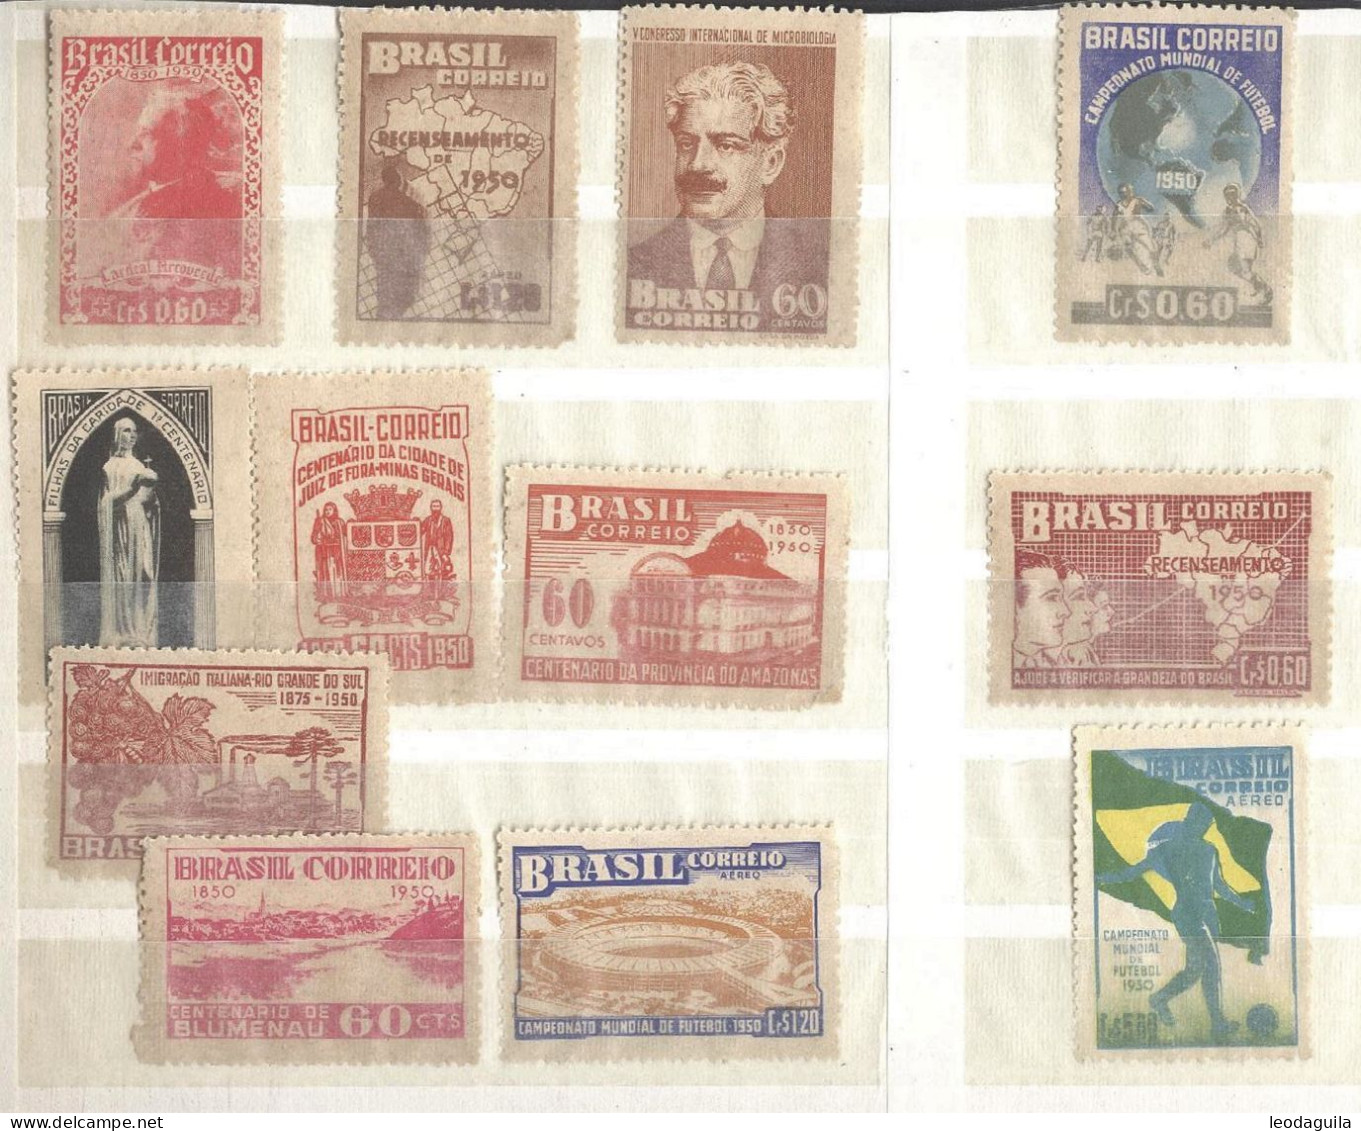 BRAZIL 1950   FULL YEAR COLLECTION  - 12 UNUSED COMMEMORATIVES STAMPS - Full Years